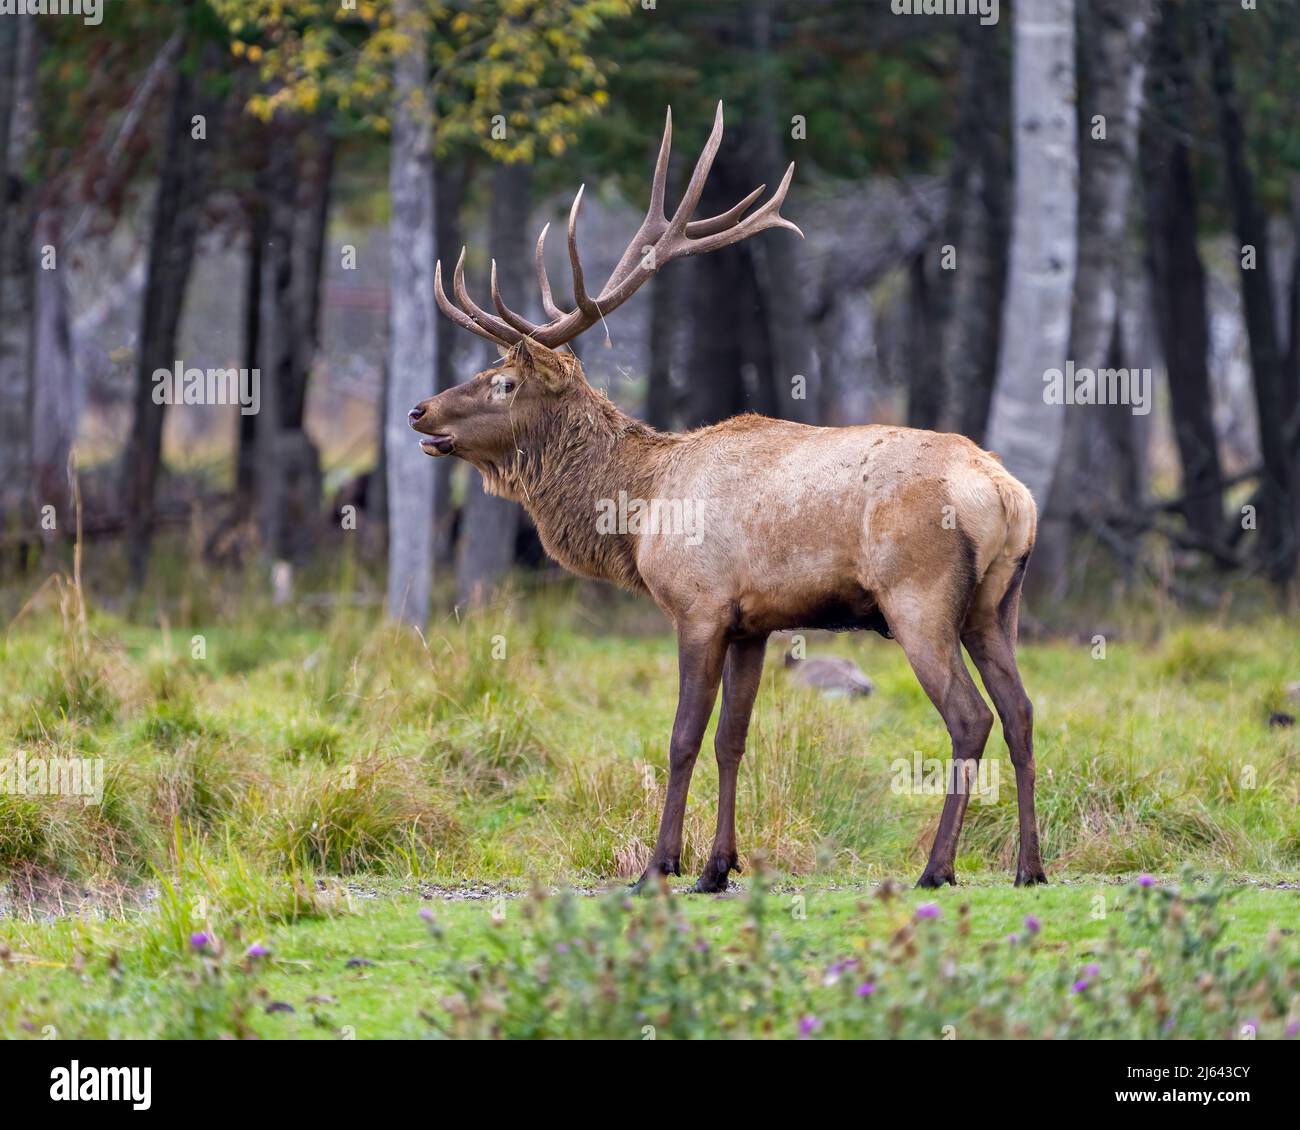 Elk buck animal side head shot close-up profile view with a blur forest background in its environment and habitat surrounding. Hunting season. Stock Photo